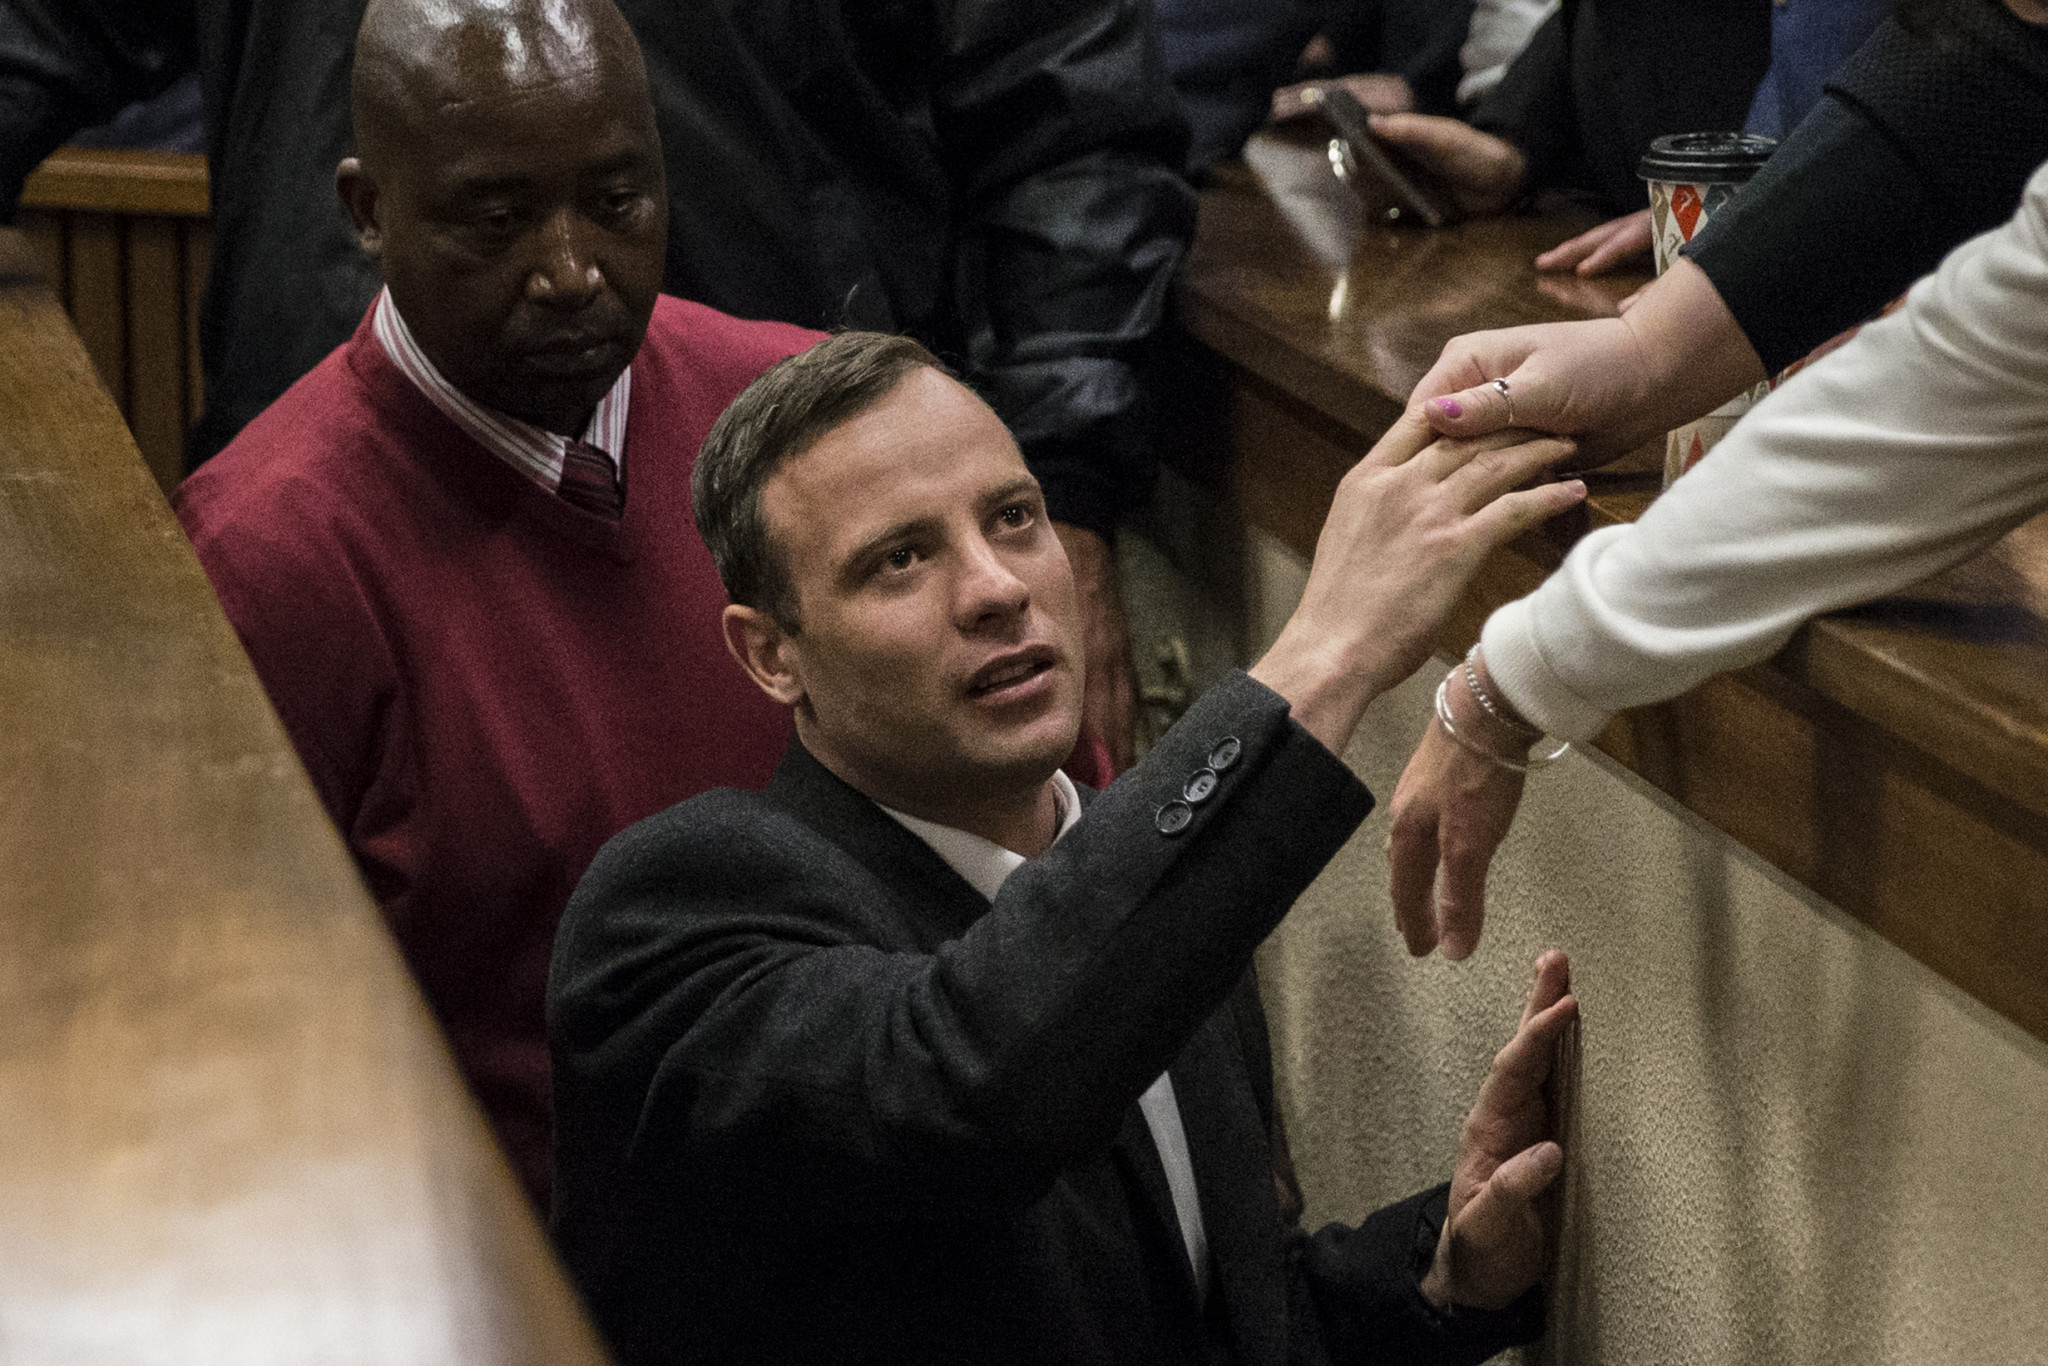 South African Constitutional Court deems Pistorius was eligible for parole in March